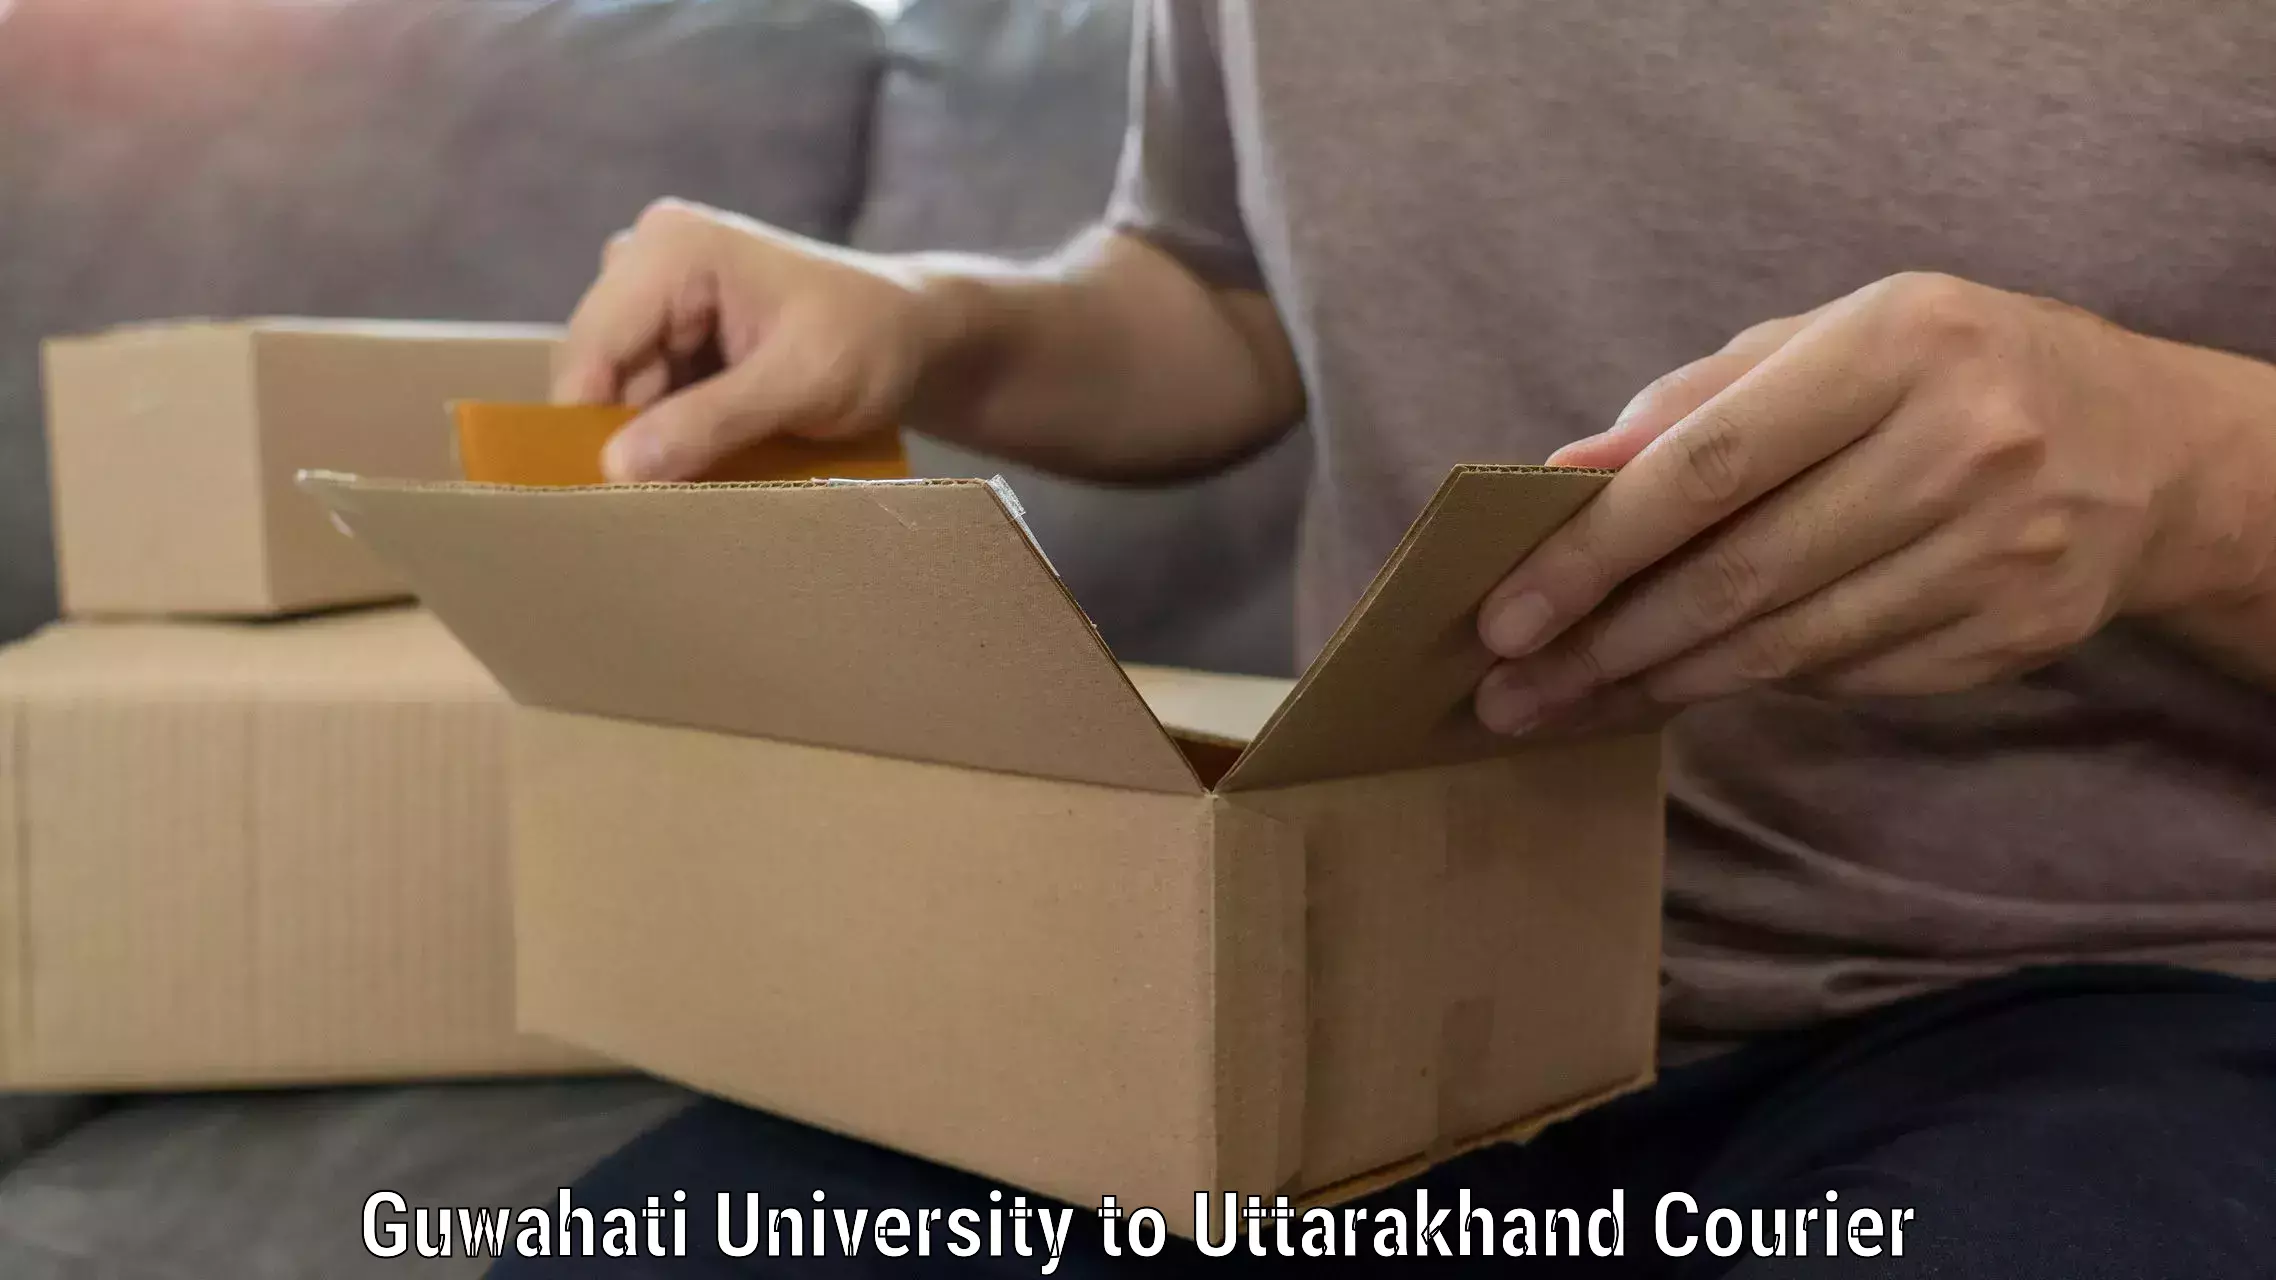 Reliable furniture transport Guwahati University to Lohaghat